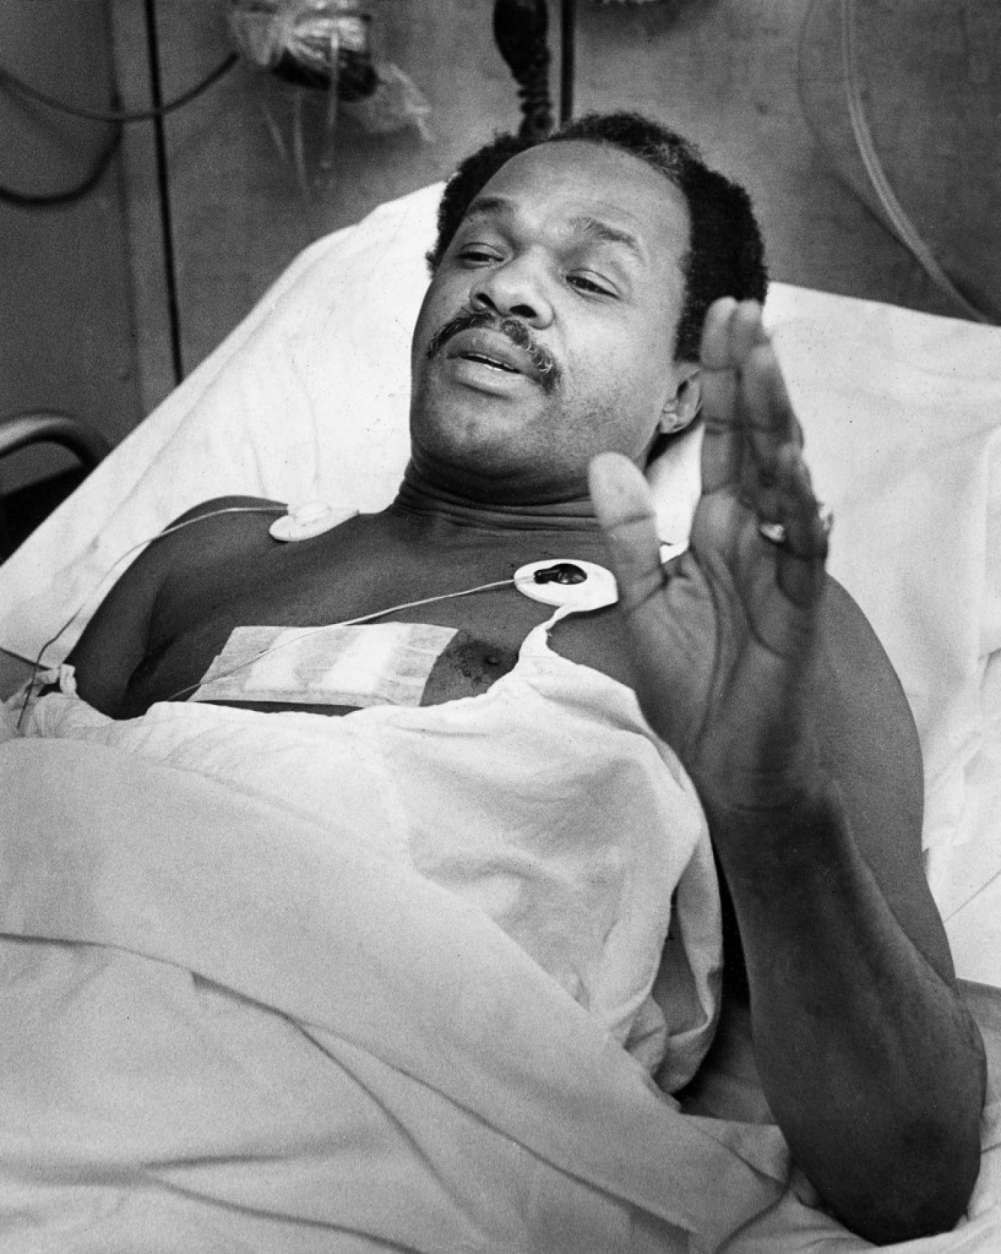 Then-Council member Marion Barry recovering after being hit by a stray shotgun pellet during the Hanfi Siege in D.C. (Courtesy D.C. Council)